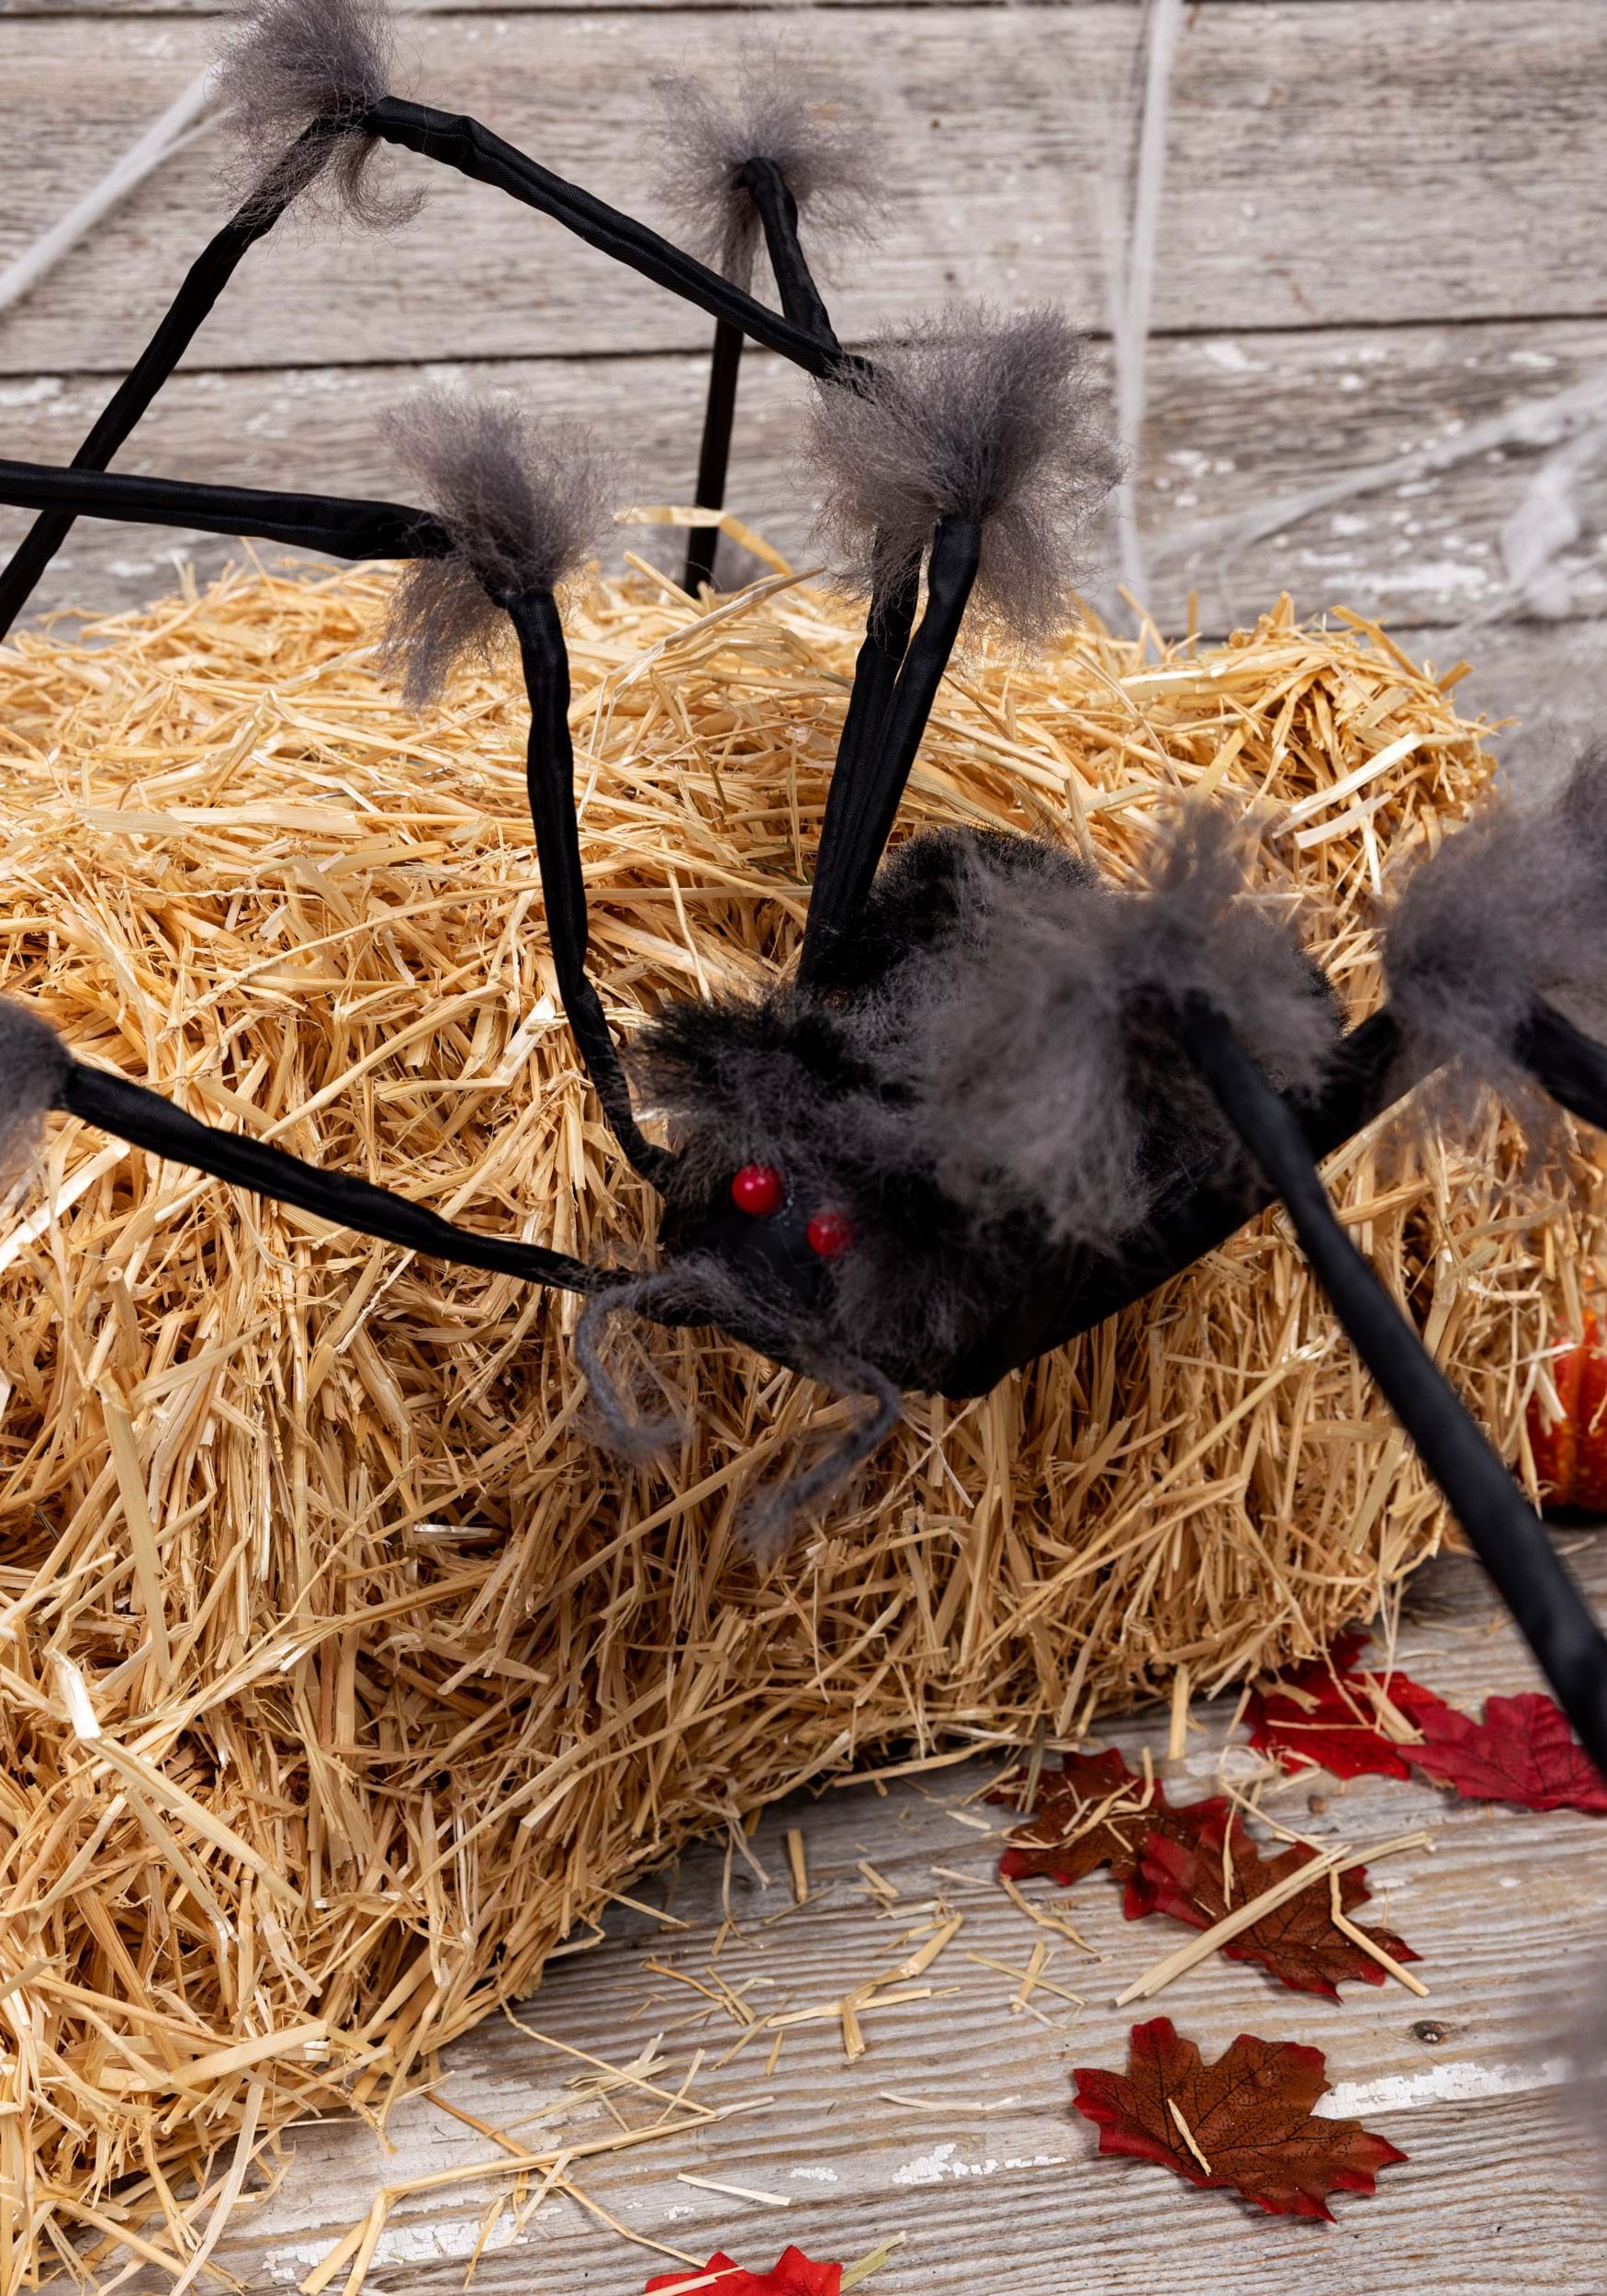 Large Hairy Gray Spider Halloween Prop , Spider Decorations